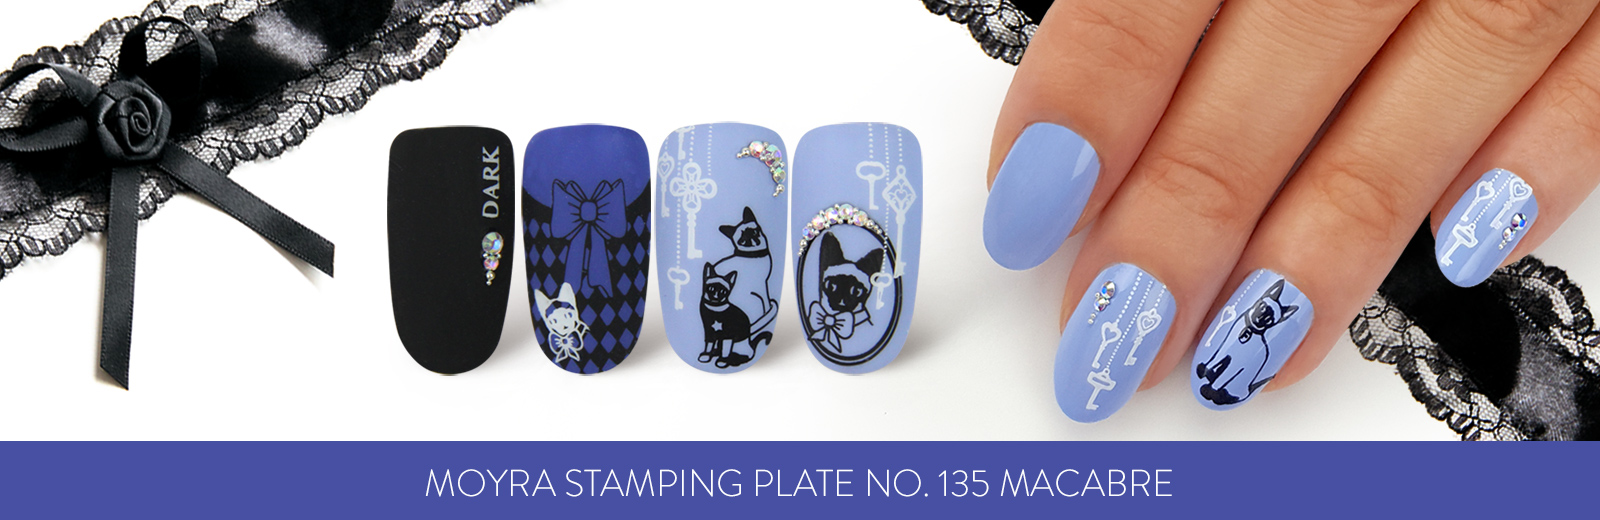 Moyra Stamping plate 135 Macabre